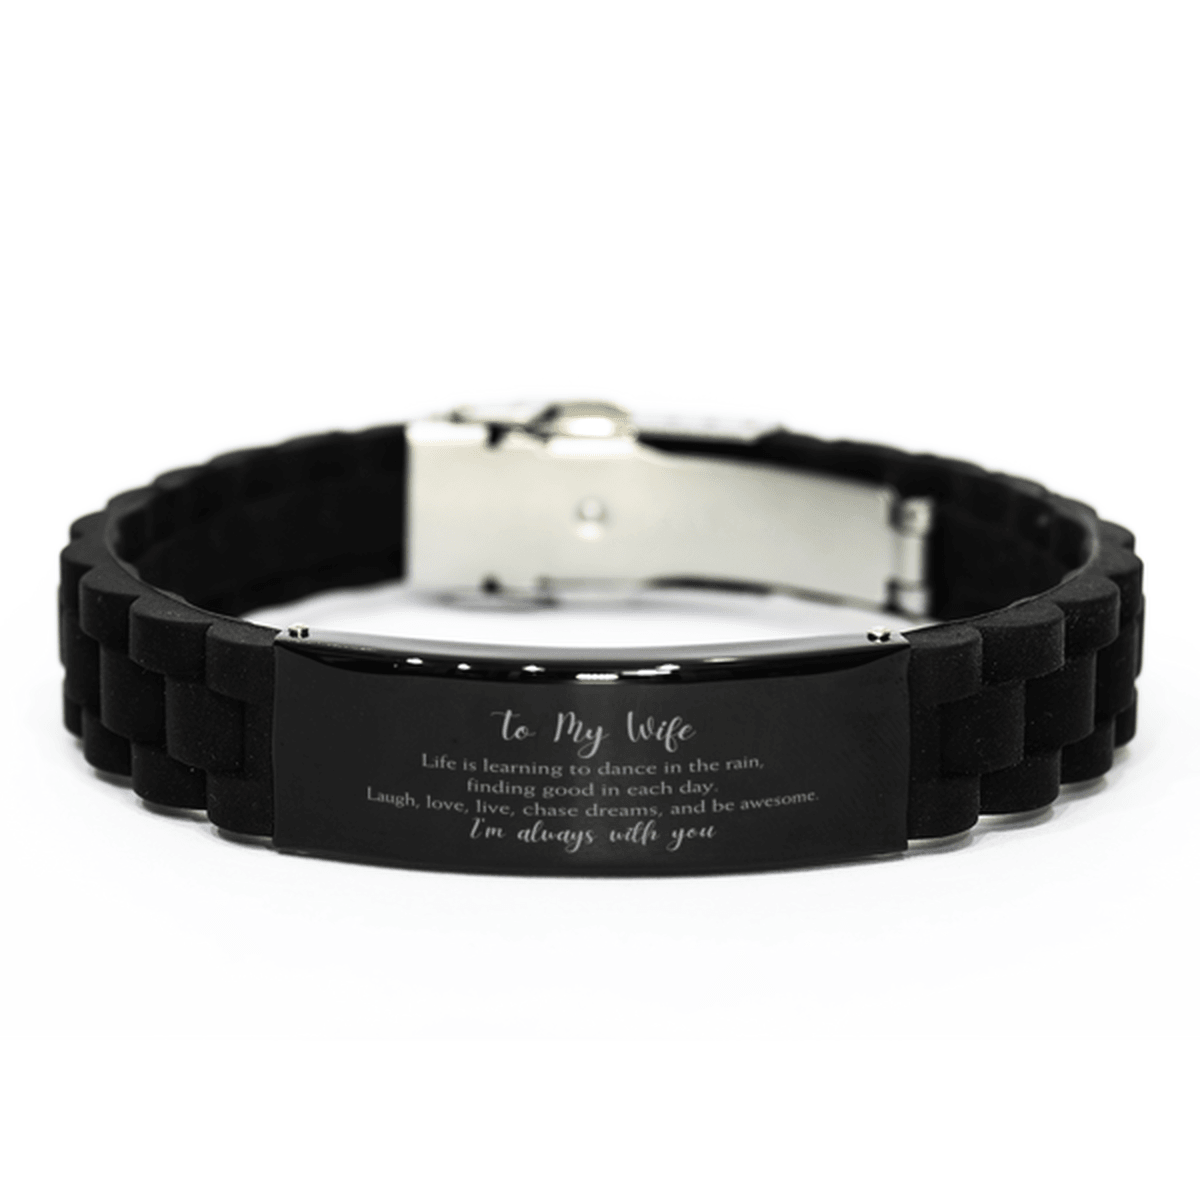 Wife Christmas Perfect Gifts, Wife Black Glidelock Clasp Bracelet, Motivational Wife Engraved Gifts, Birthday Gifts For Wife, To My Wife Life is learning to dance in the rain, finding good in each day. I'm always with you